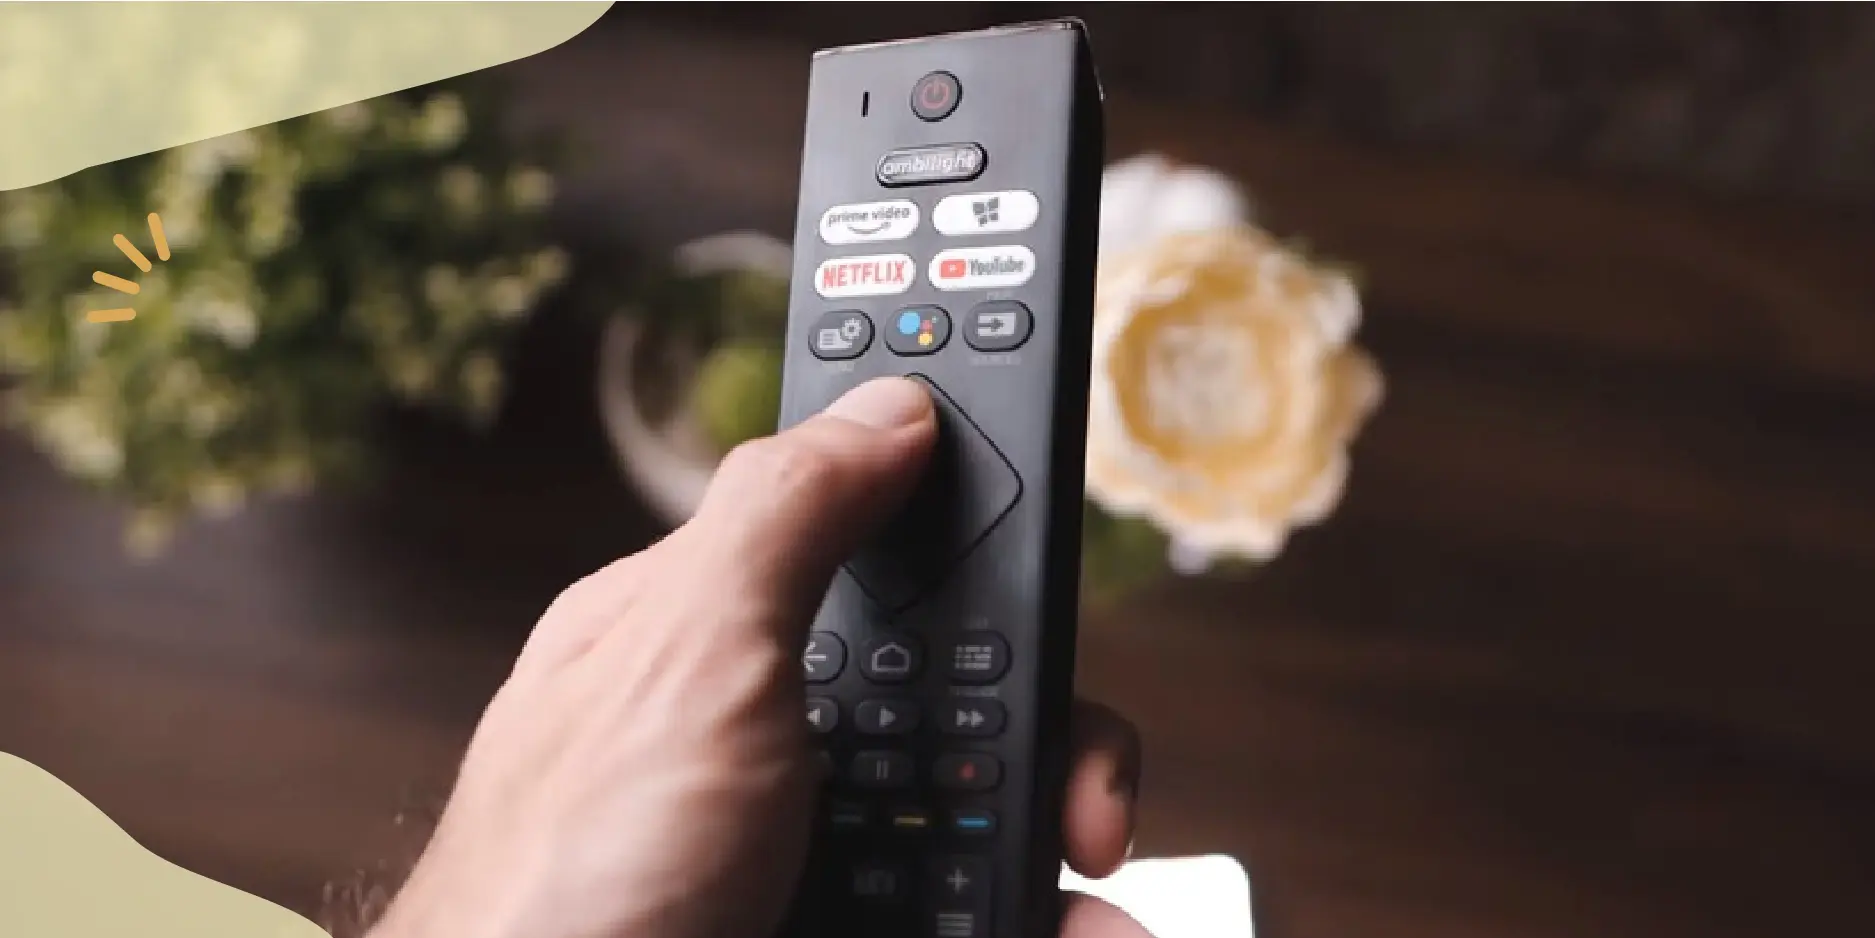 Why is The Philips Tv Remote Not Working?